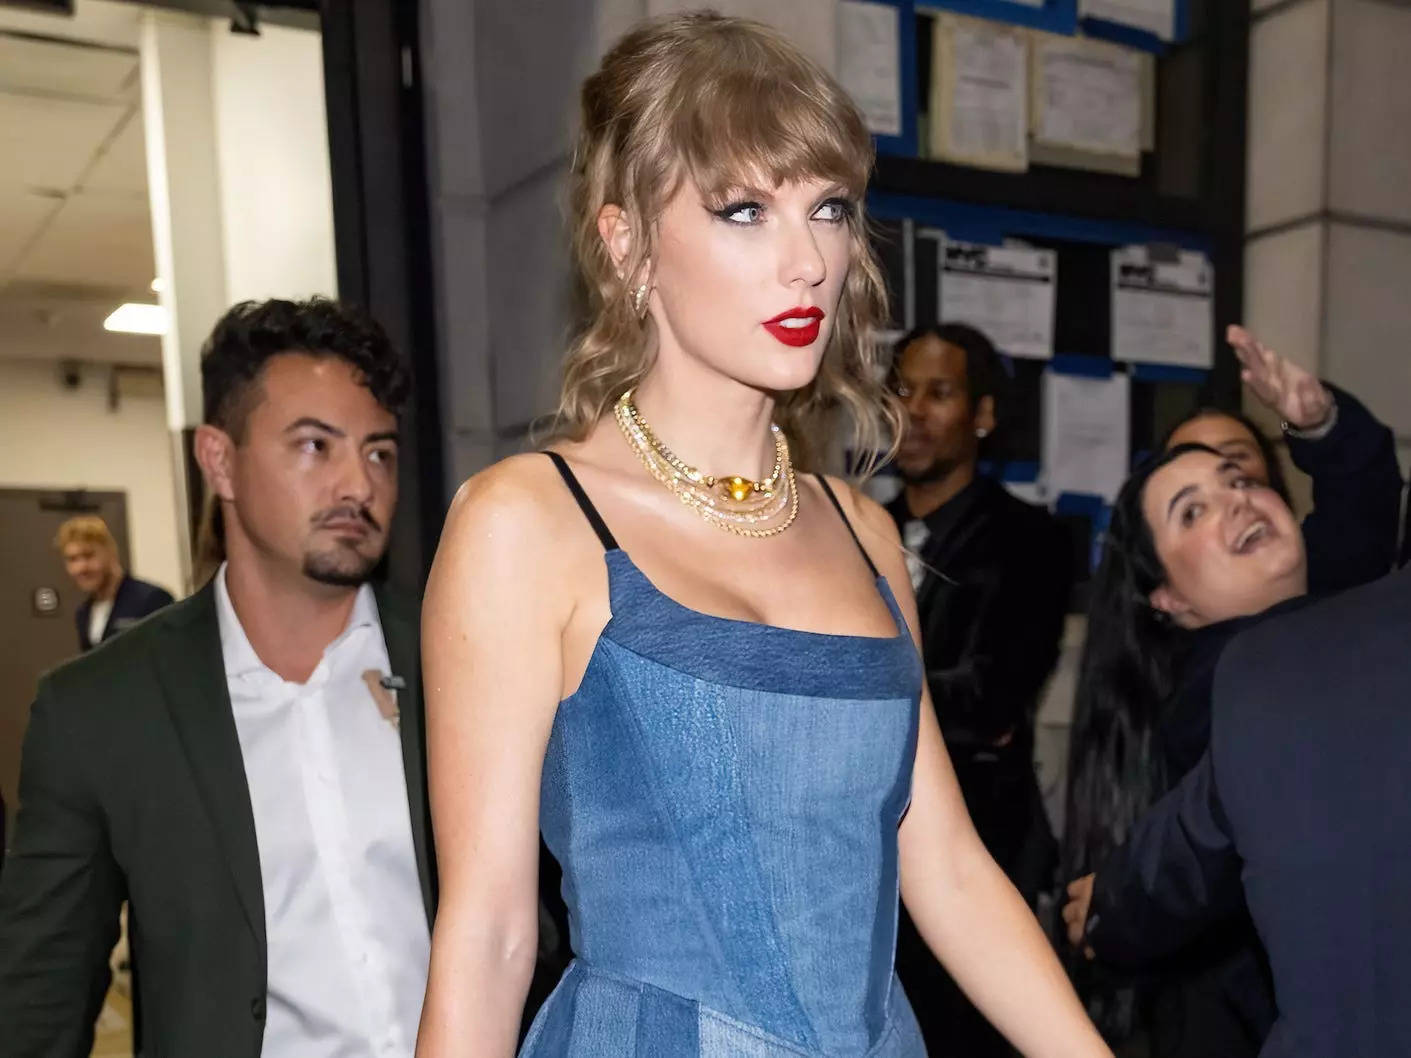 https://www.businessinsider.in/photo/104426371/why-is-everyone-so-obsessed-with-taylor-swifts-style-its-because-shes-the-girl-next-door-but-better.jpg?imgsize=67958